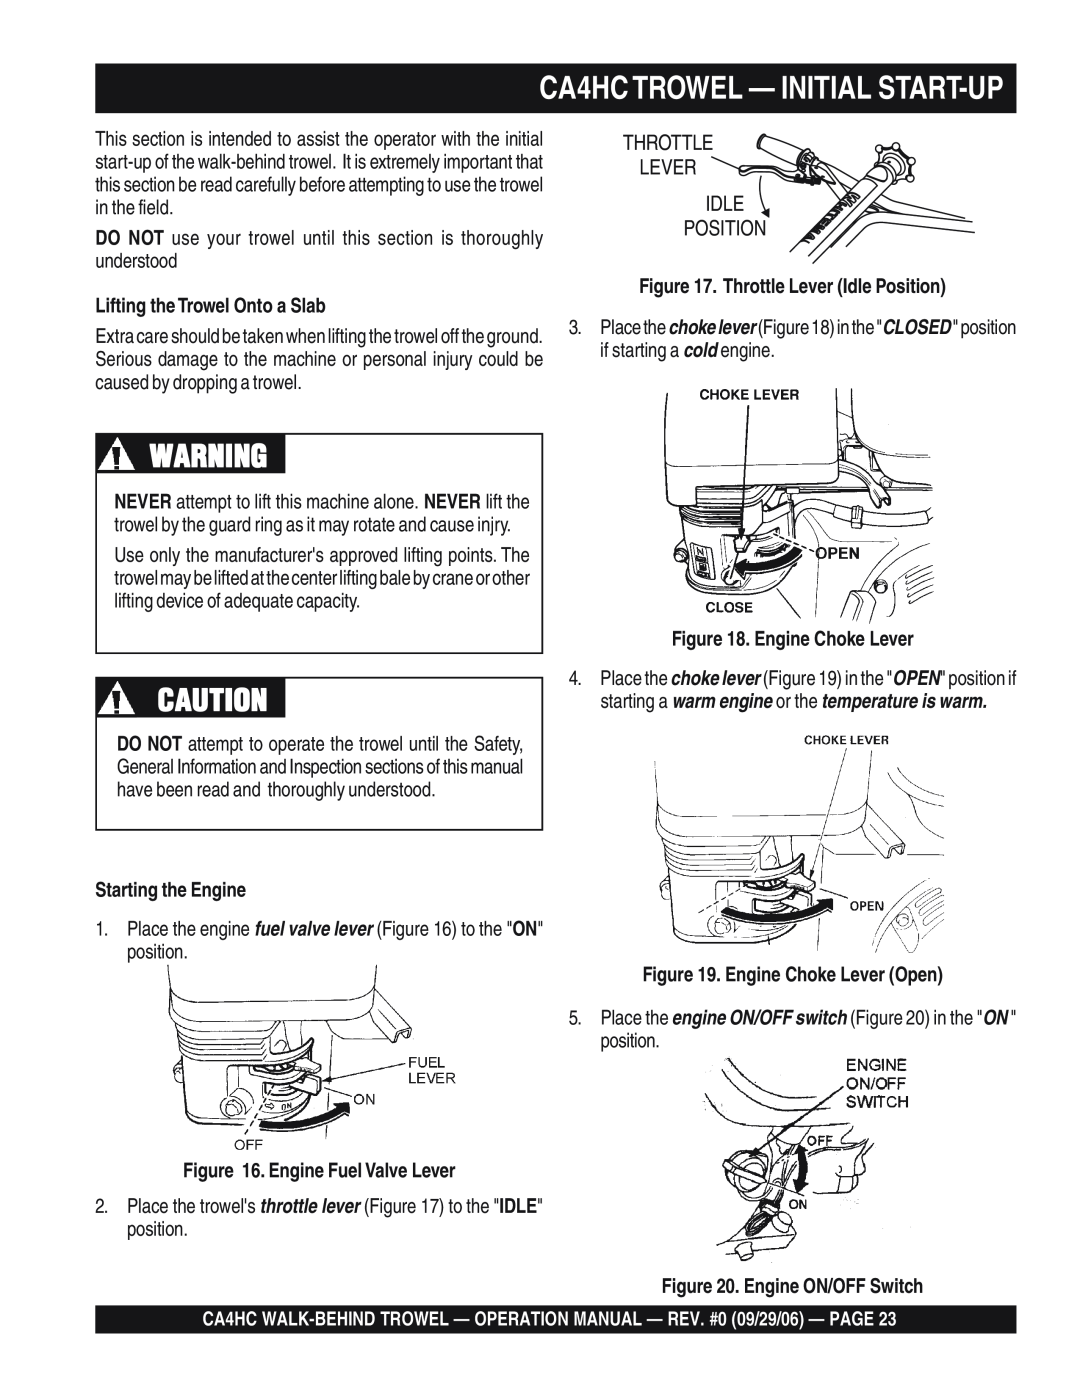 Multiquip operation manual CA4HCTROWEL — INITIAL START-UP, Throttle Lever Idle Position, Lifting the Trowel Onto a Slab 